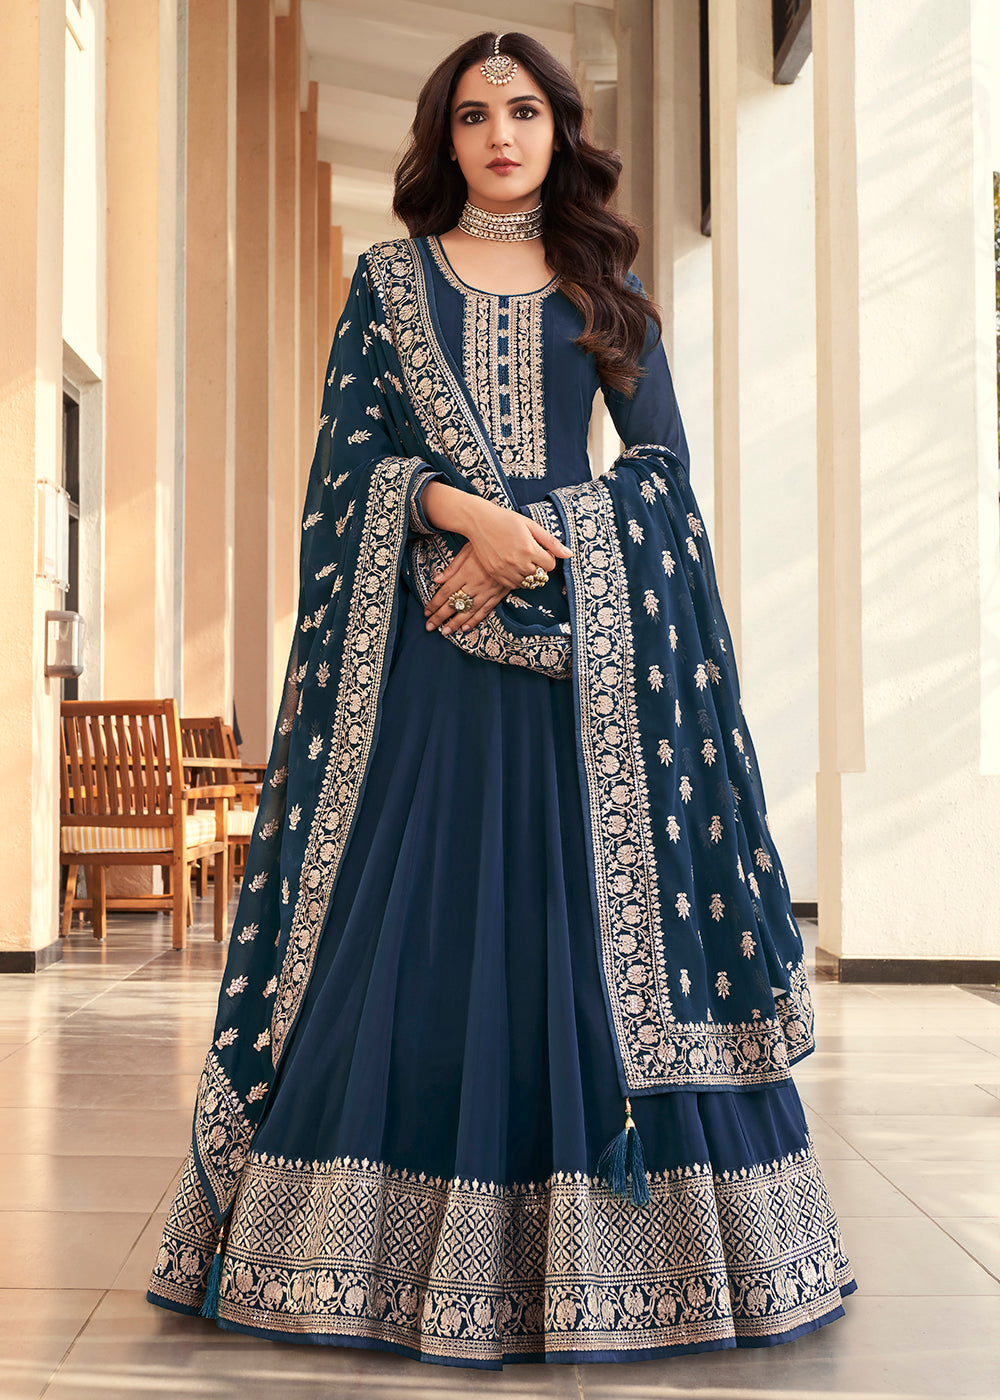 Buy Now Georgette Navy Blue Embroidered Indian Long Anarkali Dress Online in USA, UK, Australia, New Zealand, Canada & Worldwide at Empress Clothing.